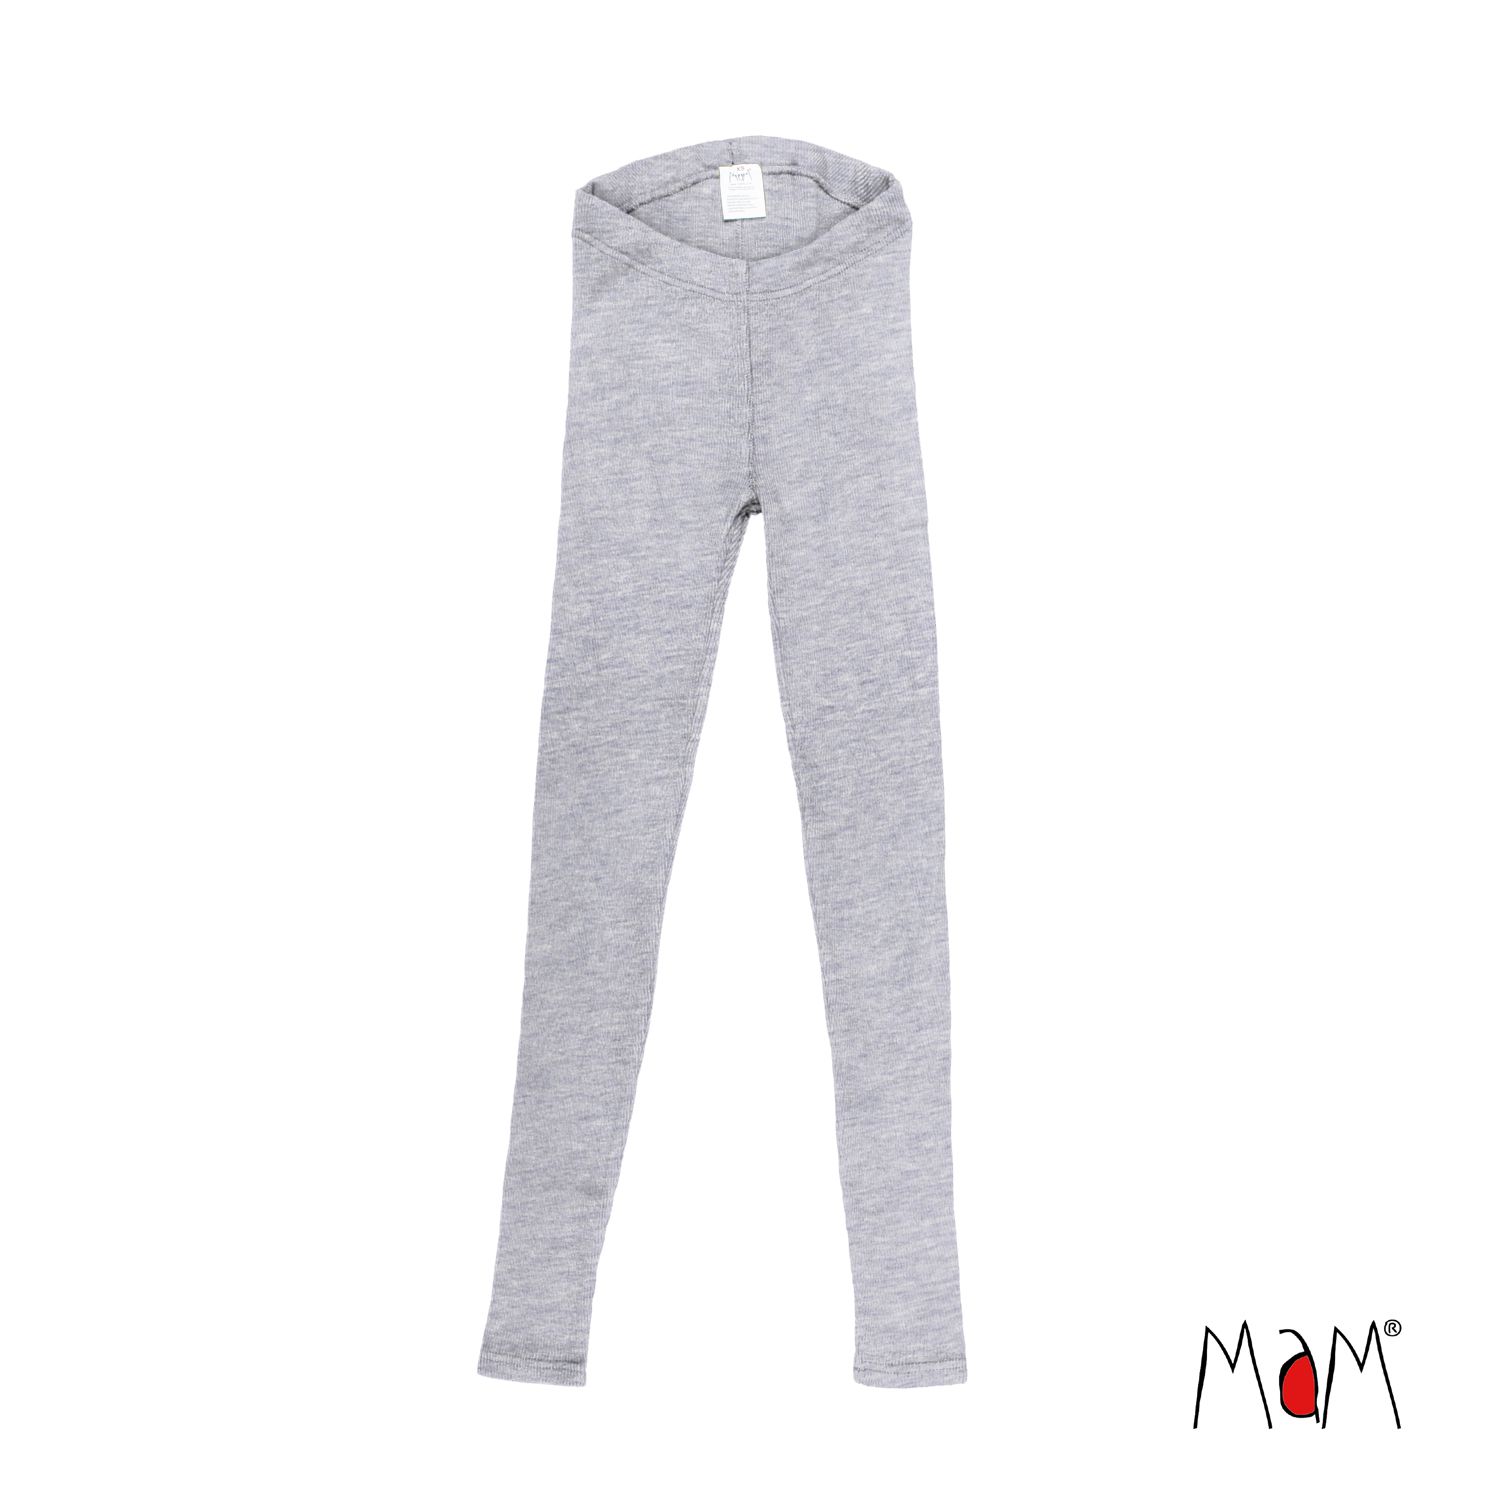 MaM All-Time Leggings aus Wolle